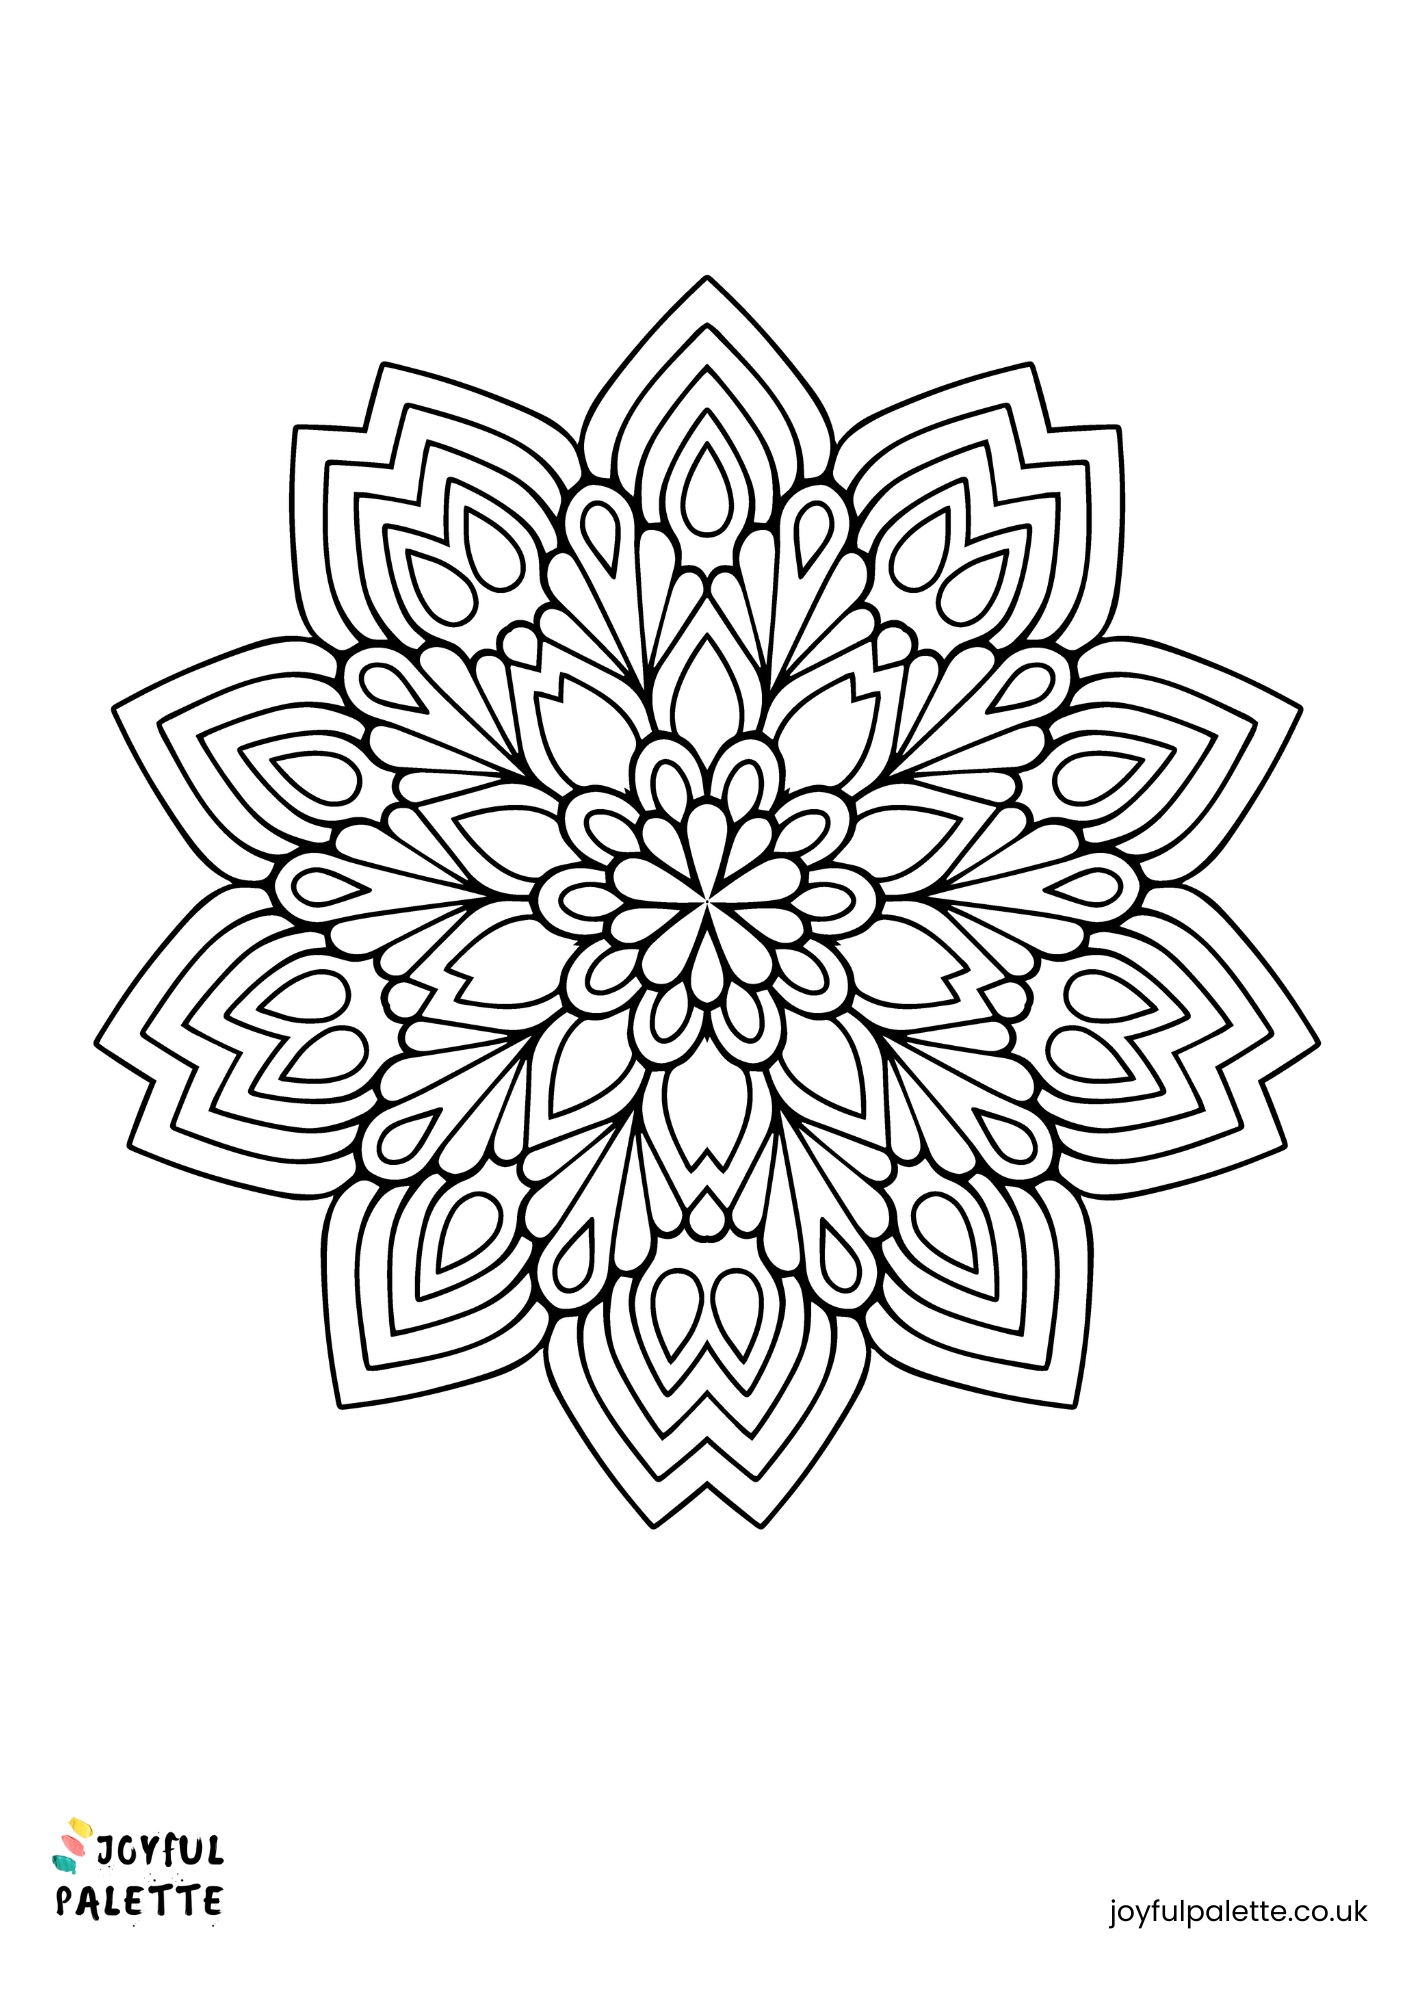 Easy Flower Mandala Coloring Page